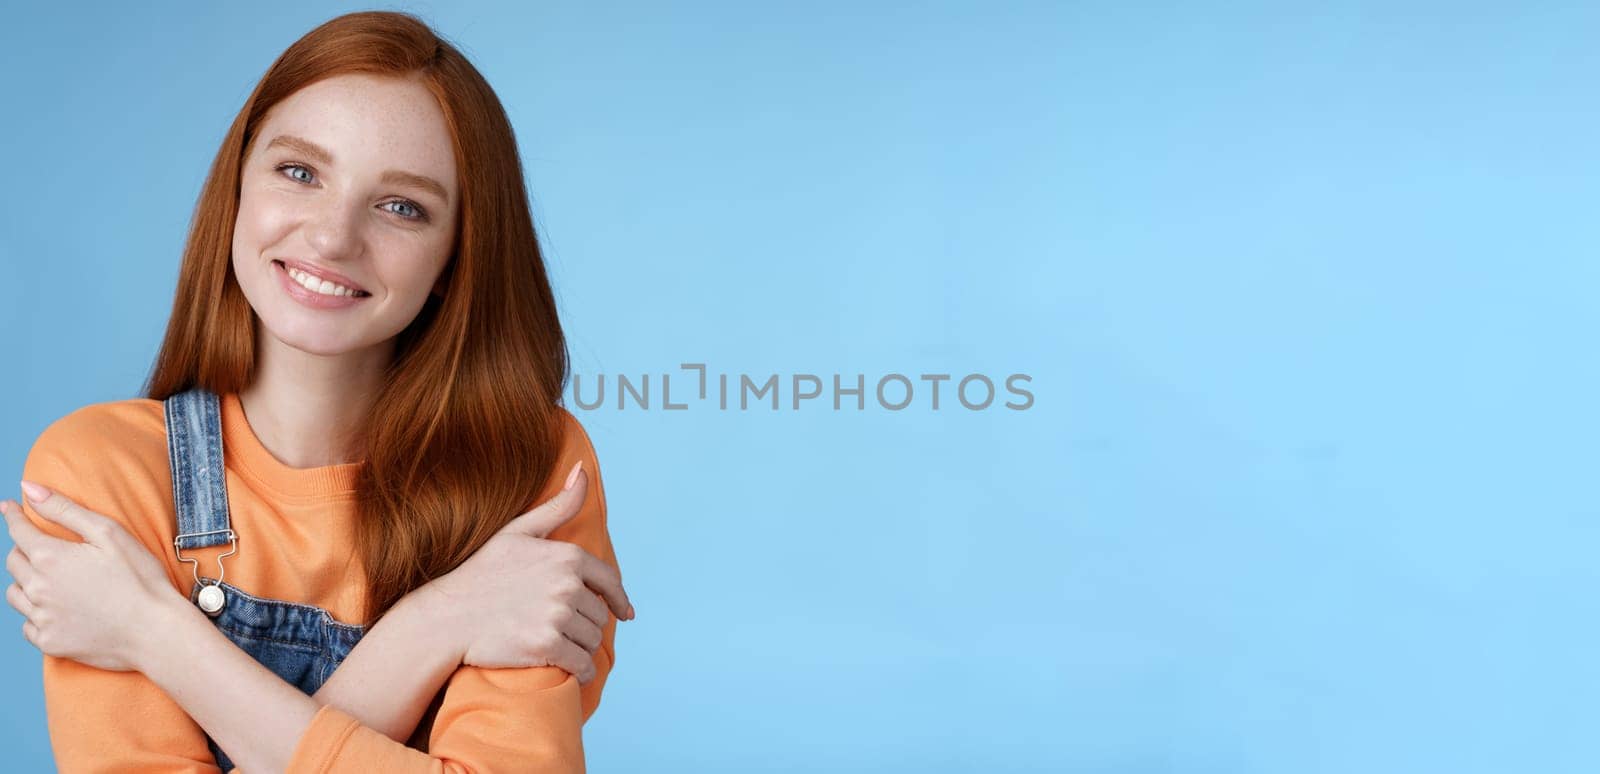 Lifestyle. Tender silly redhead girl standing blue background smiling joyfully hugging arms crossed body feel chilly grinning delighted talking boyfriend romantic date asking lend jacket cold summer evening.